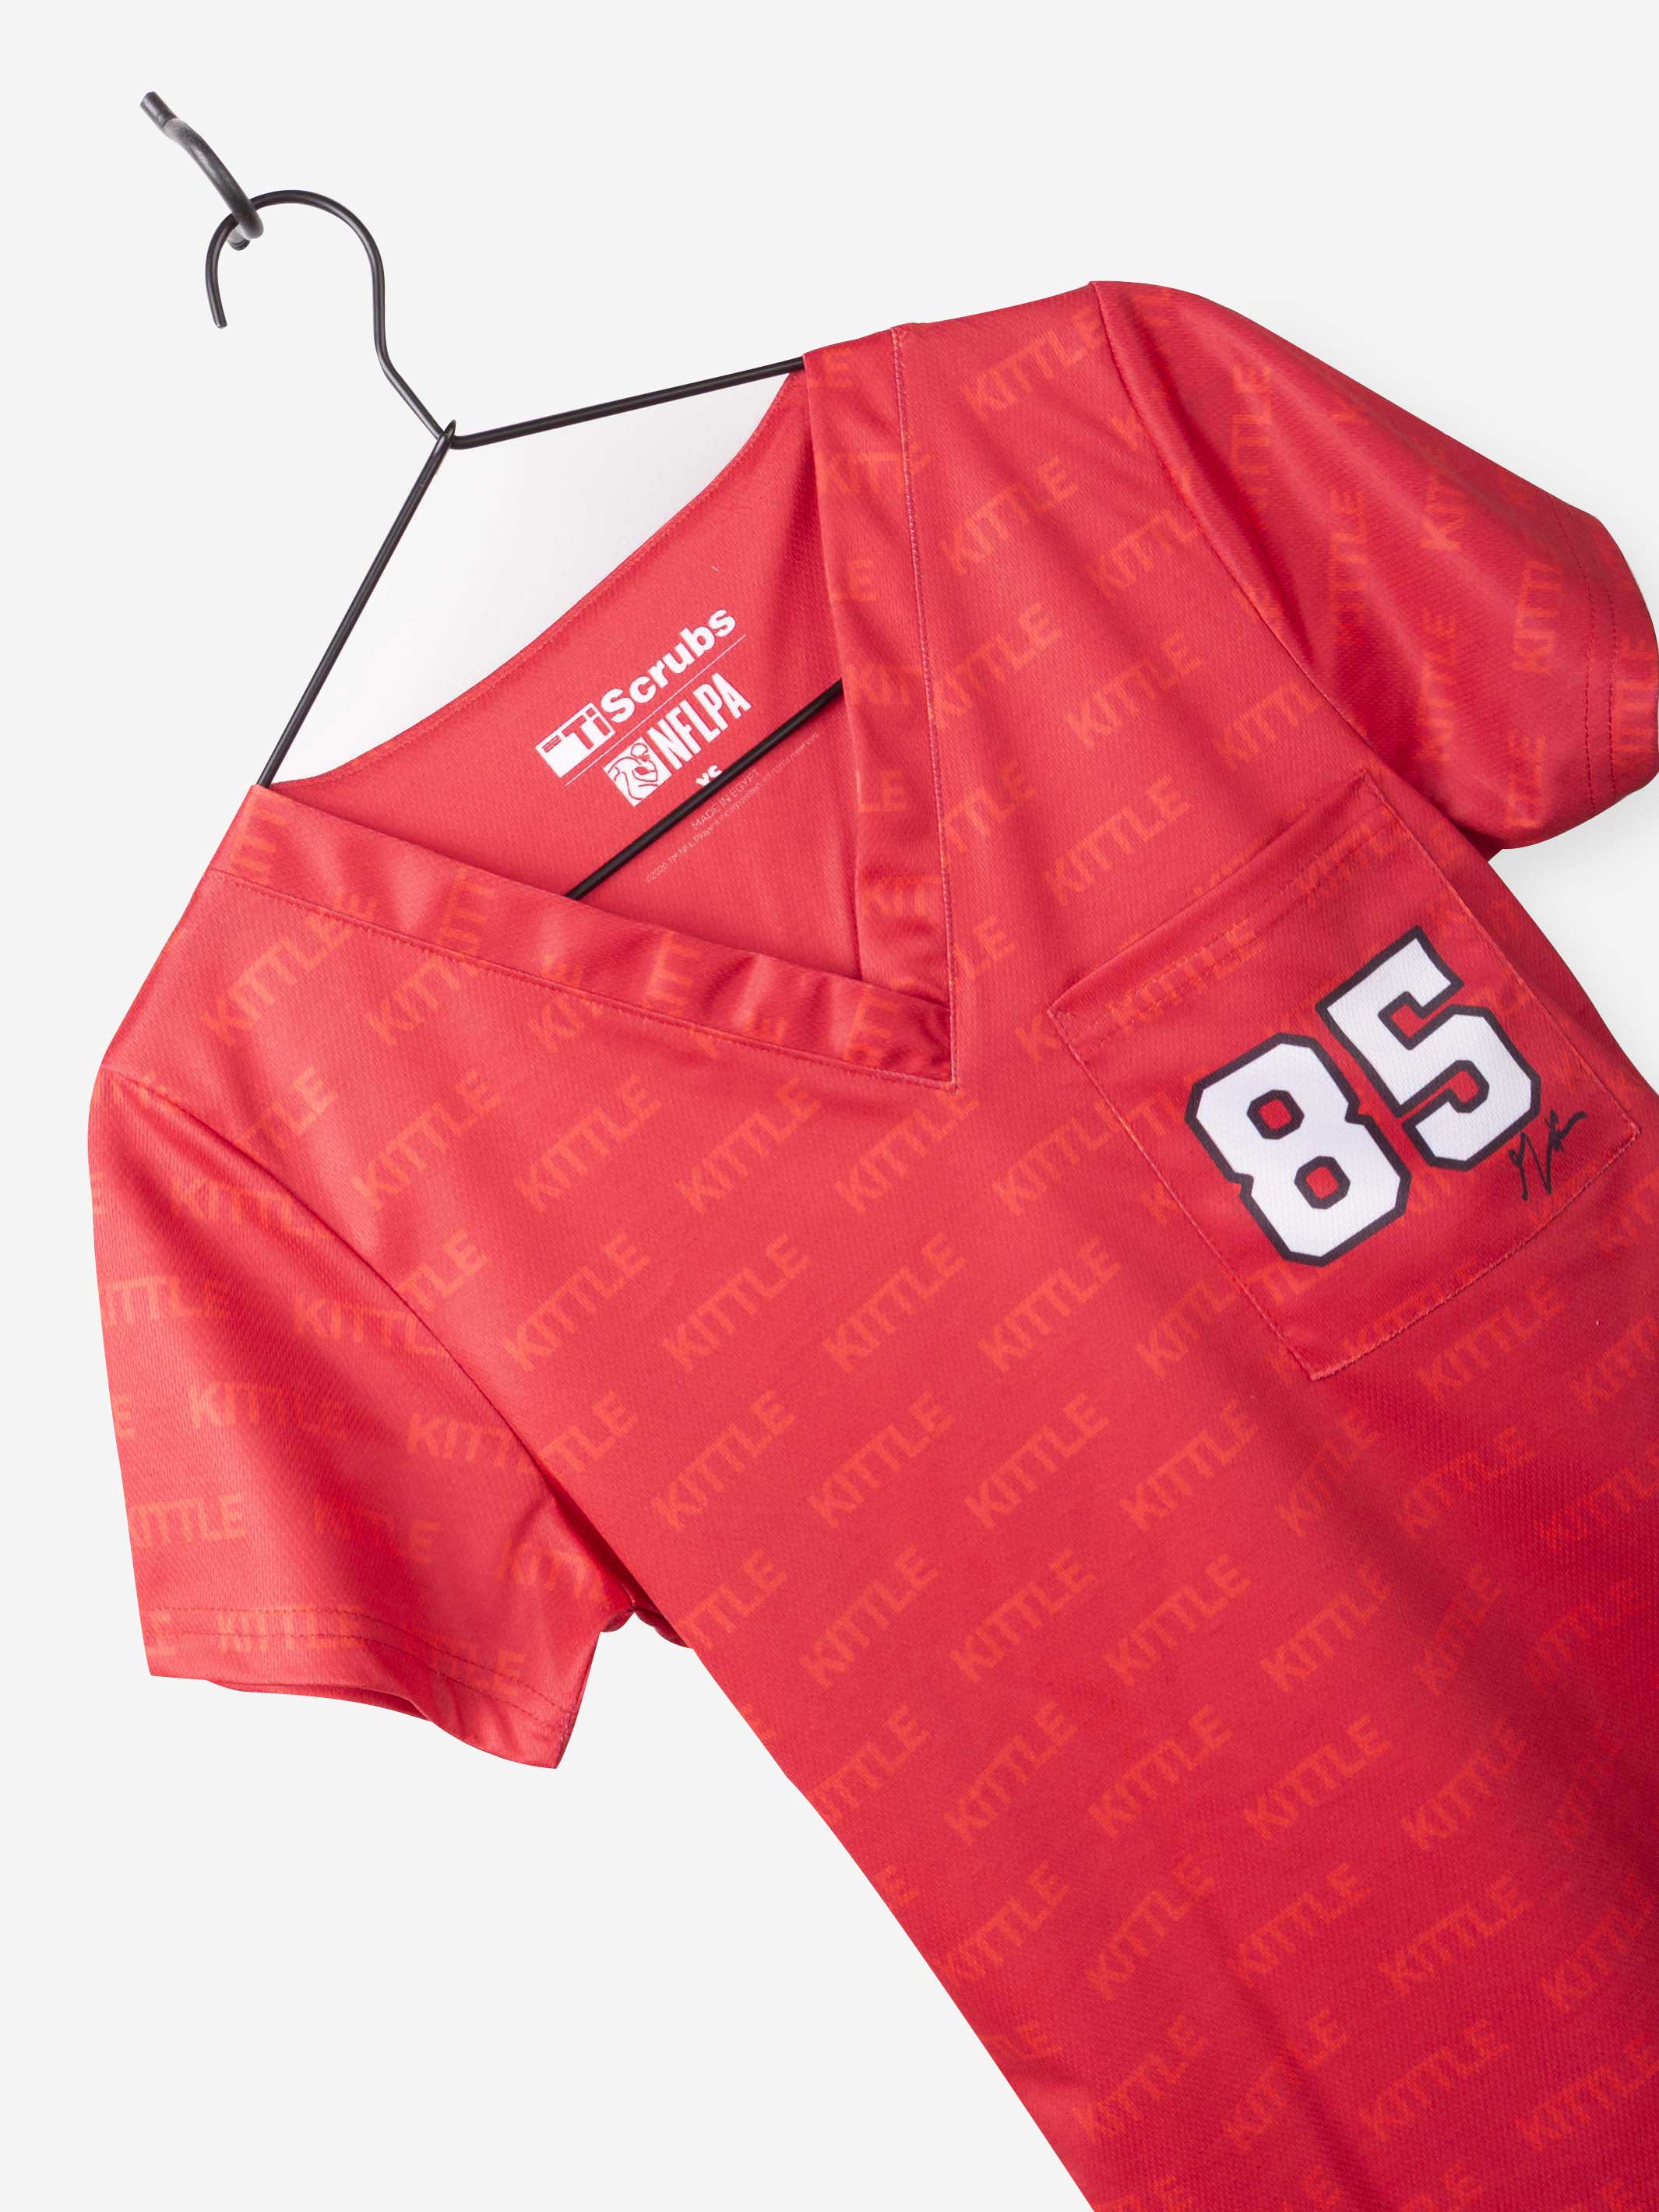 Women&#39;s George Kittle Scrub Top in Red Jersey Color number 85